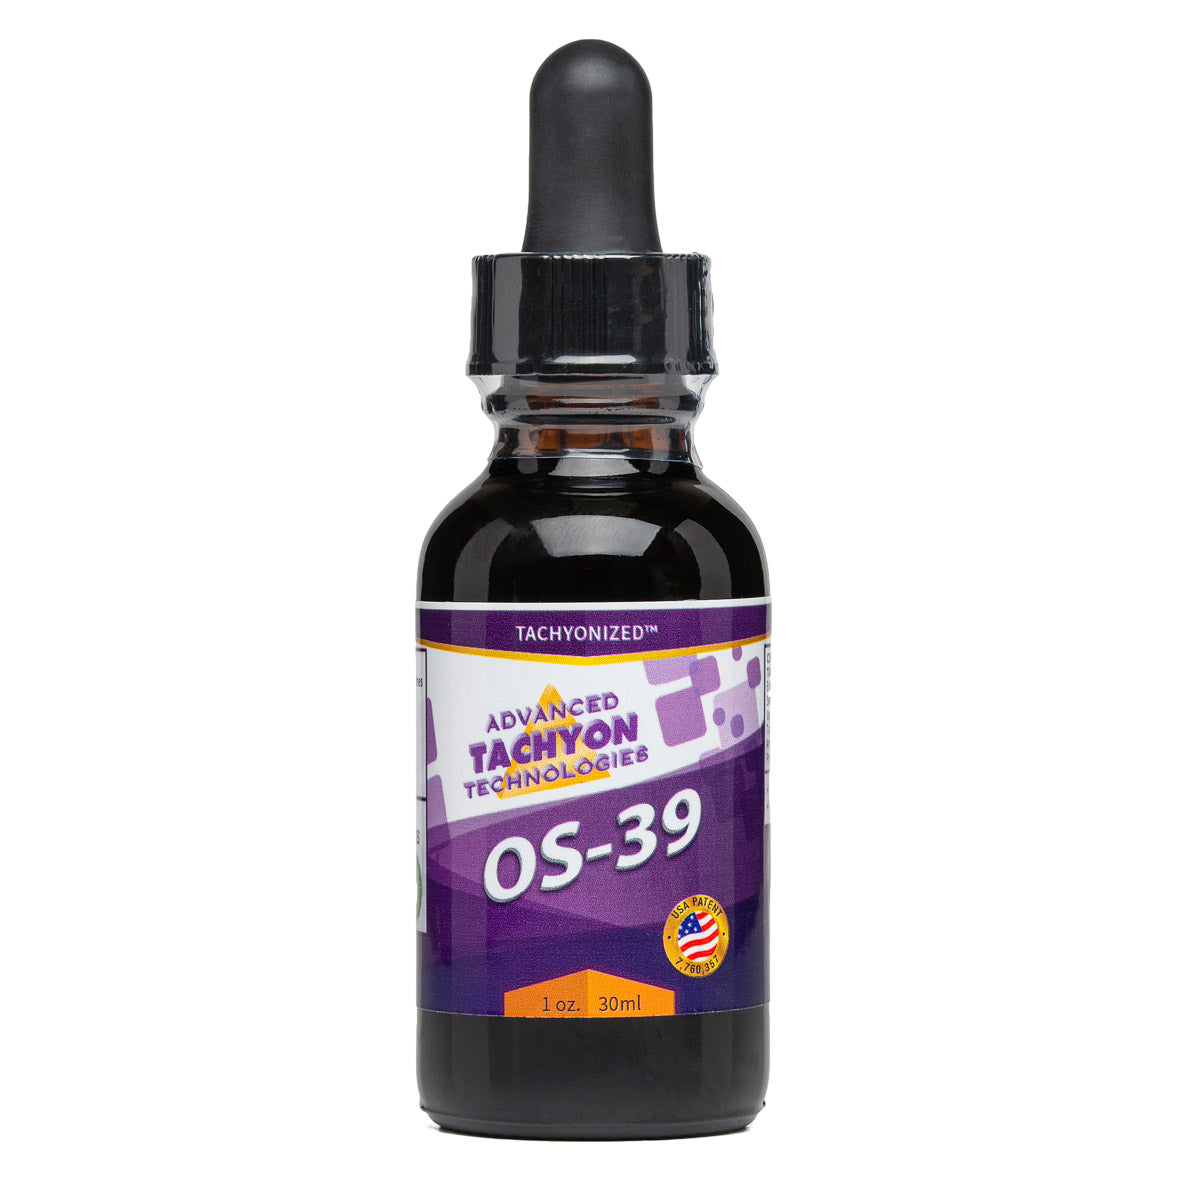 OS-39 | Echinacea | ATT Tachyon | Raw Living UK | Supplements | Tincture | Immune Support | Advanced Tachyon Technologies Tachyonized Echinacea (alcohol-free) suitable for children. Echinacea is thought to help the immune system to fight infection